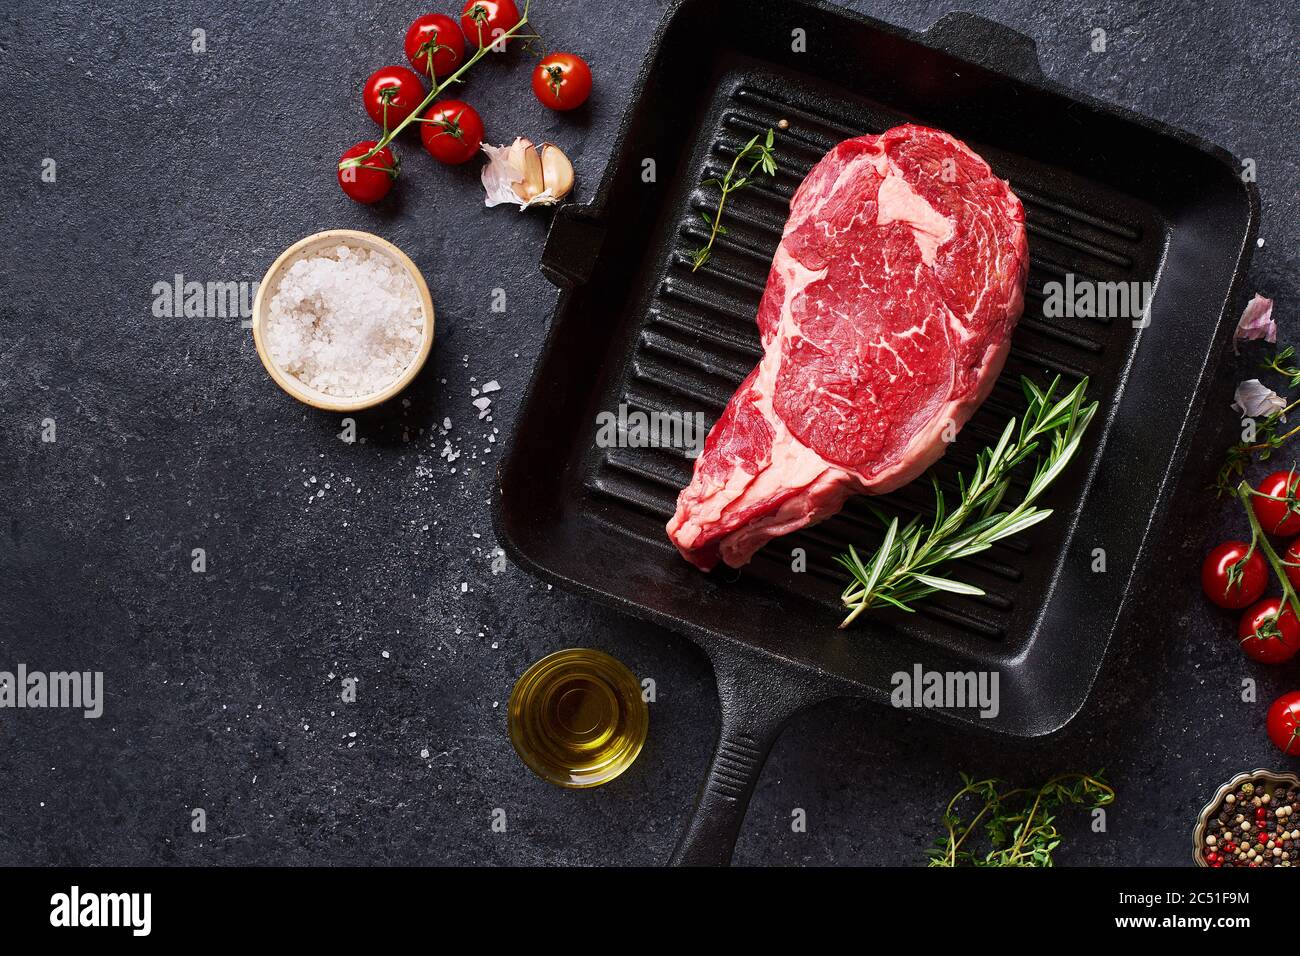 Top view Black Angus prime beef rib eye steak on cast iron grill pan with fresh rosemary, cherry tomatoes, olive oil and spices. Creative layout with Stock Photo